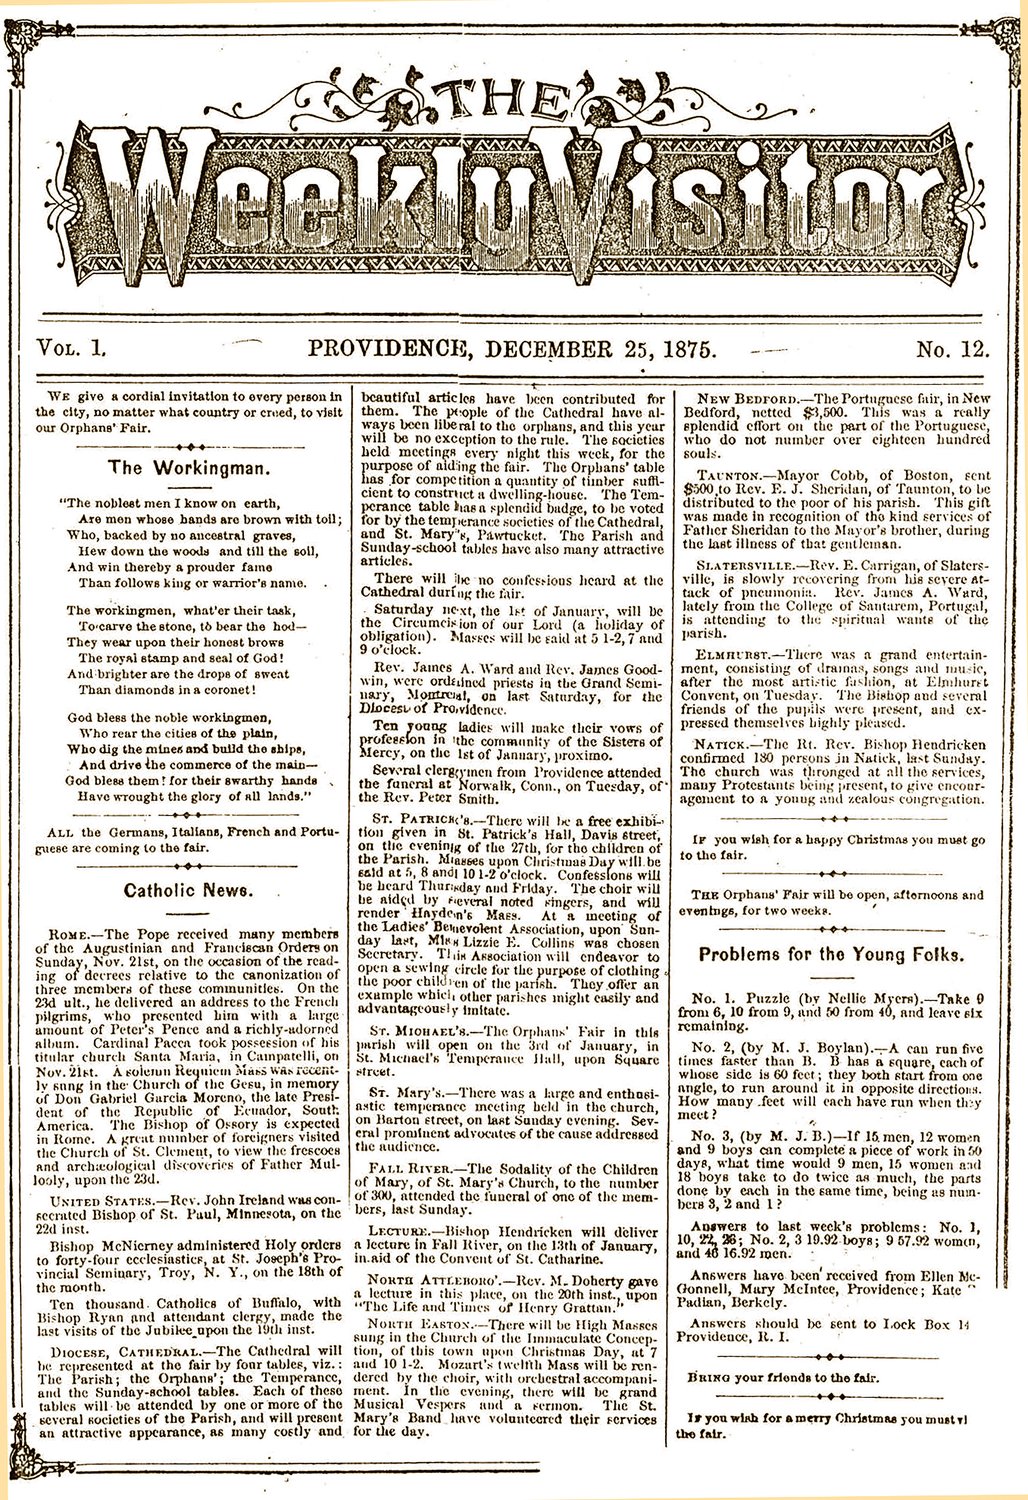 A copy of The Weekly Visitor’s Christmas edition from 1875.